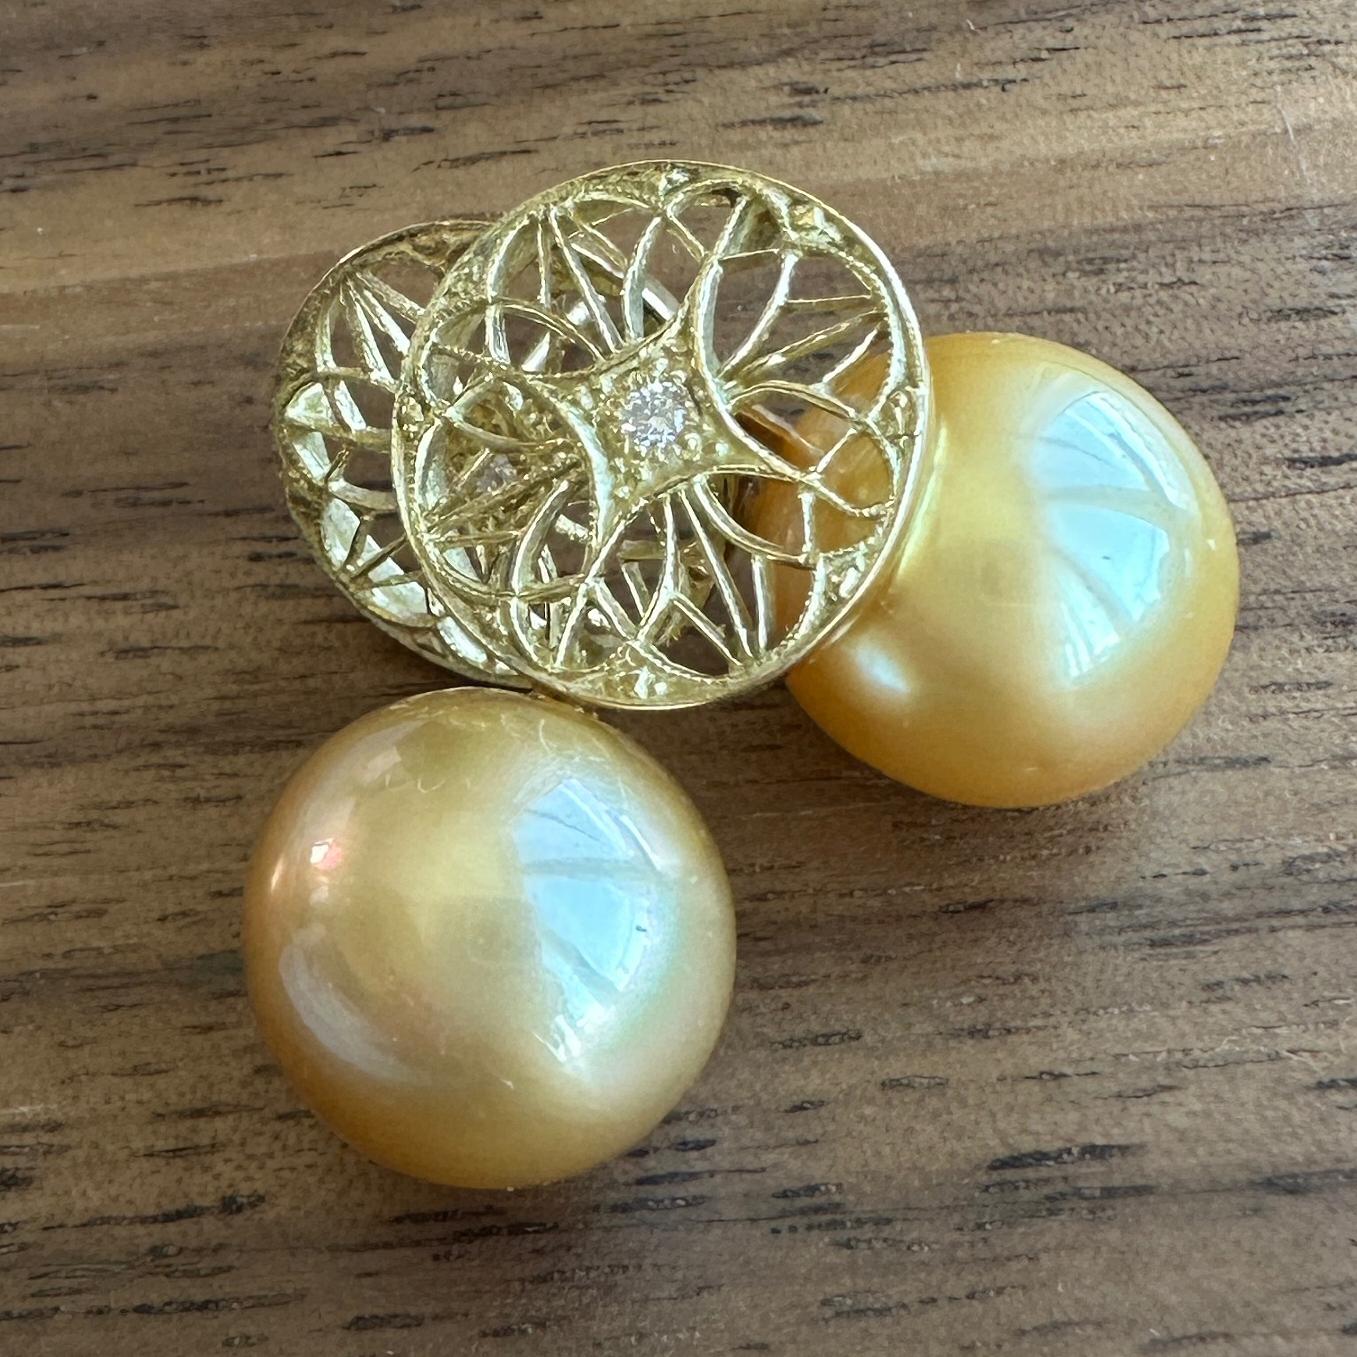 Golden South Sea Pearl Earrings with 18k Gold Filigree Tops, Diamond Accent For Sale 1